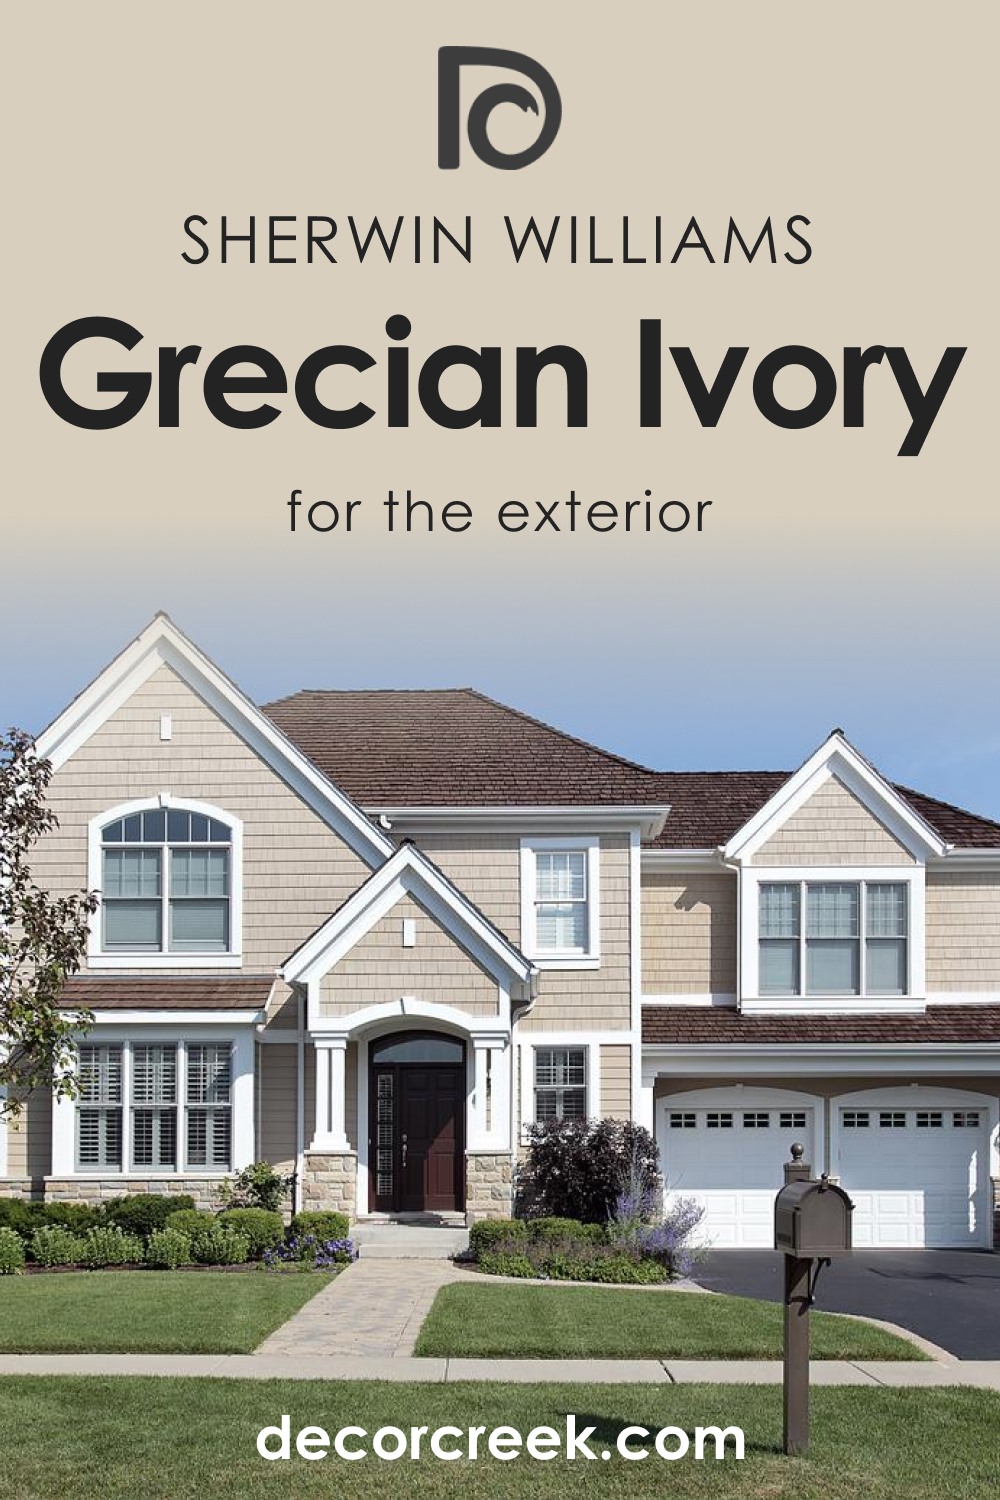 How to Use SW 7541 Grecian Ivory for an Exterior?